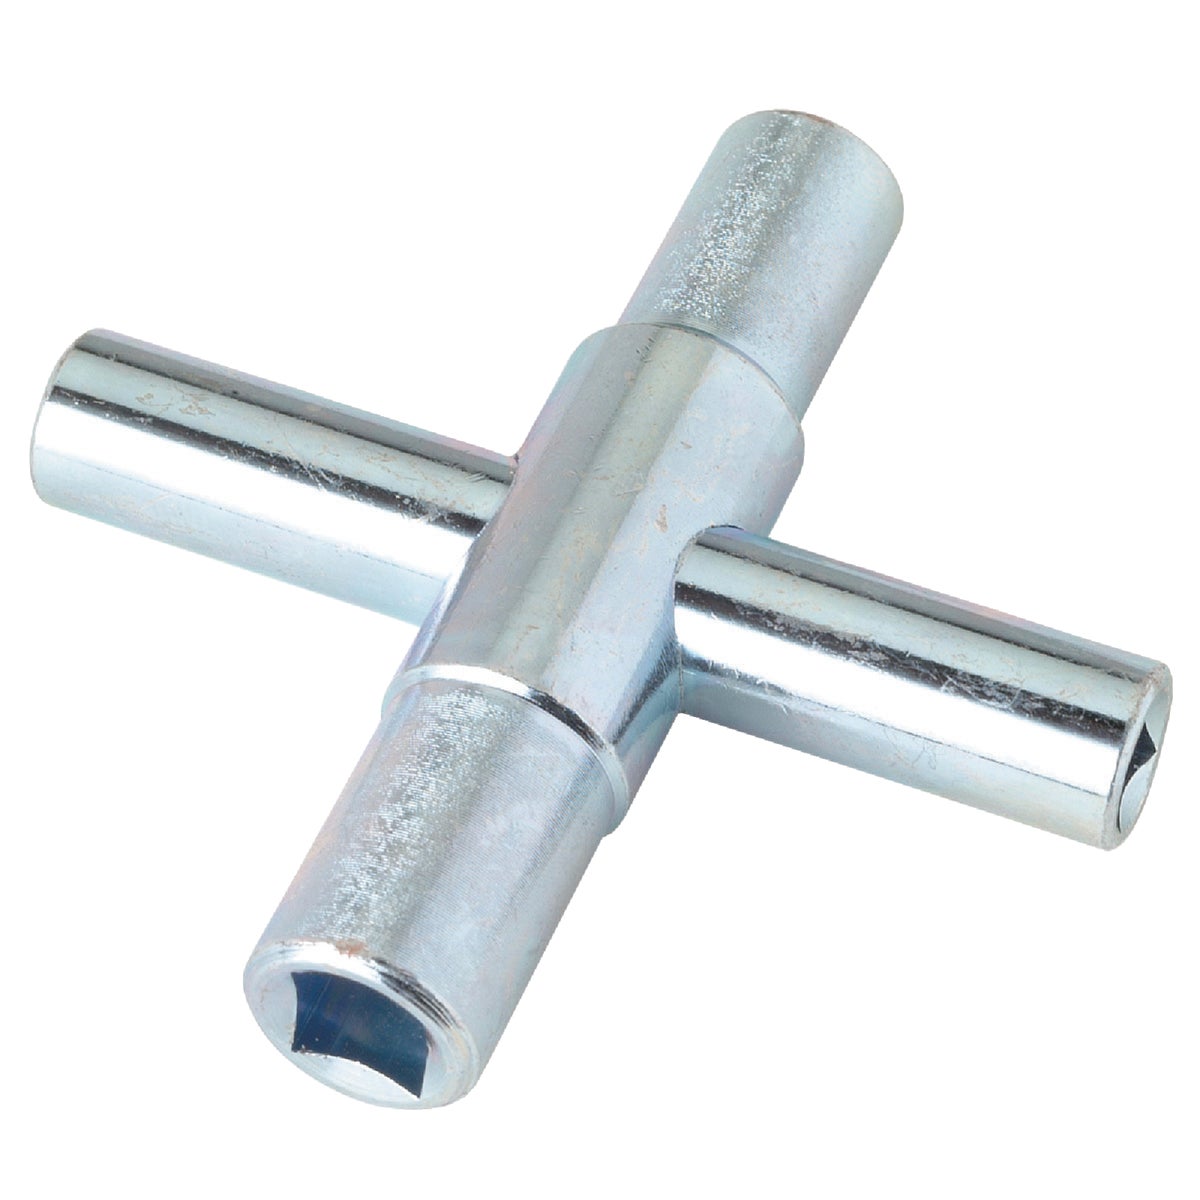 Brasscraft 4-Way Faucet Key for 1/4, 9/32, 5/16, 11/32 In. Stems